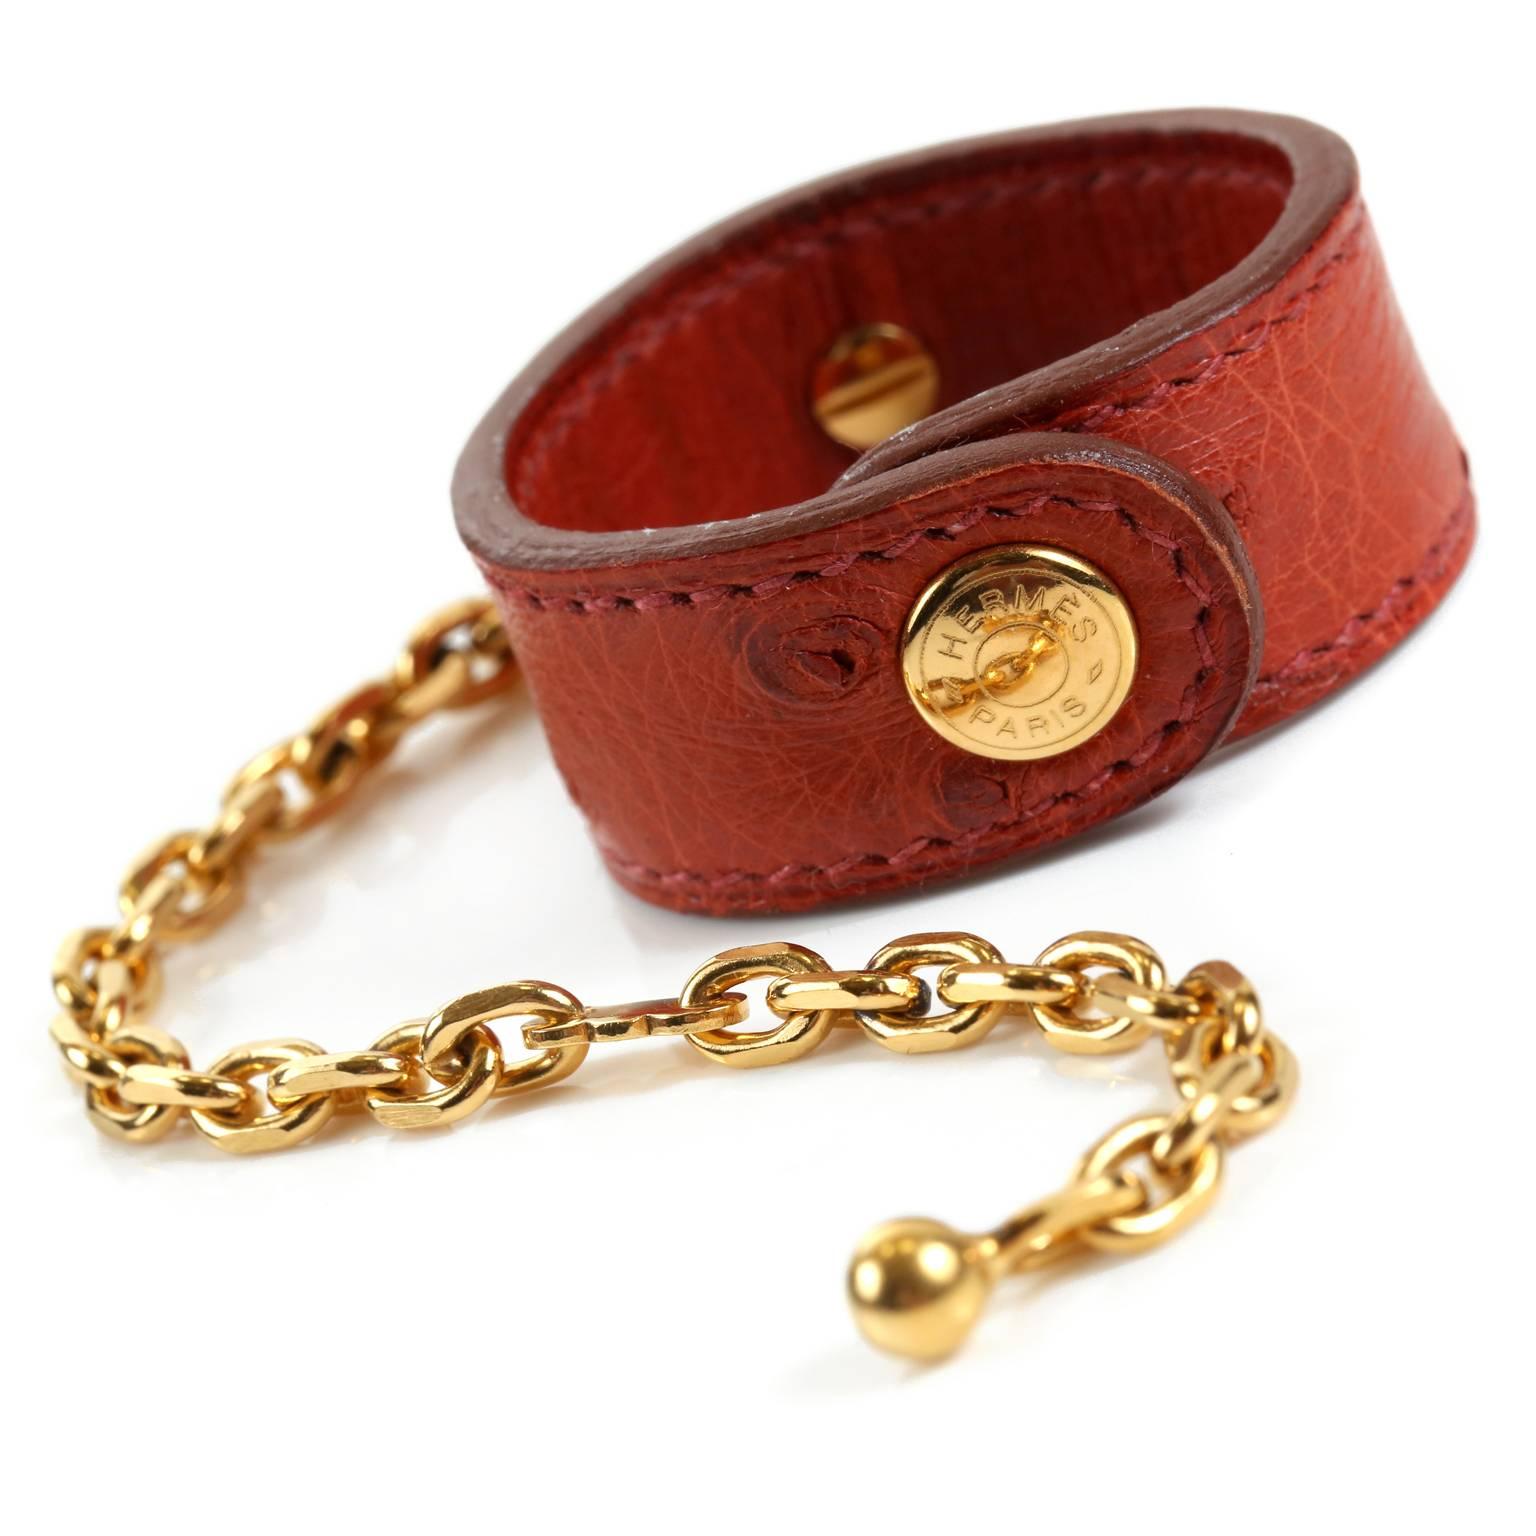 Hermes Ostrich Glove Holder- Chestnut with Gold In Excellent Condition For Sale In Malibu, CA